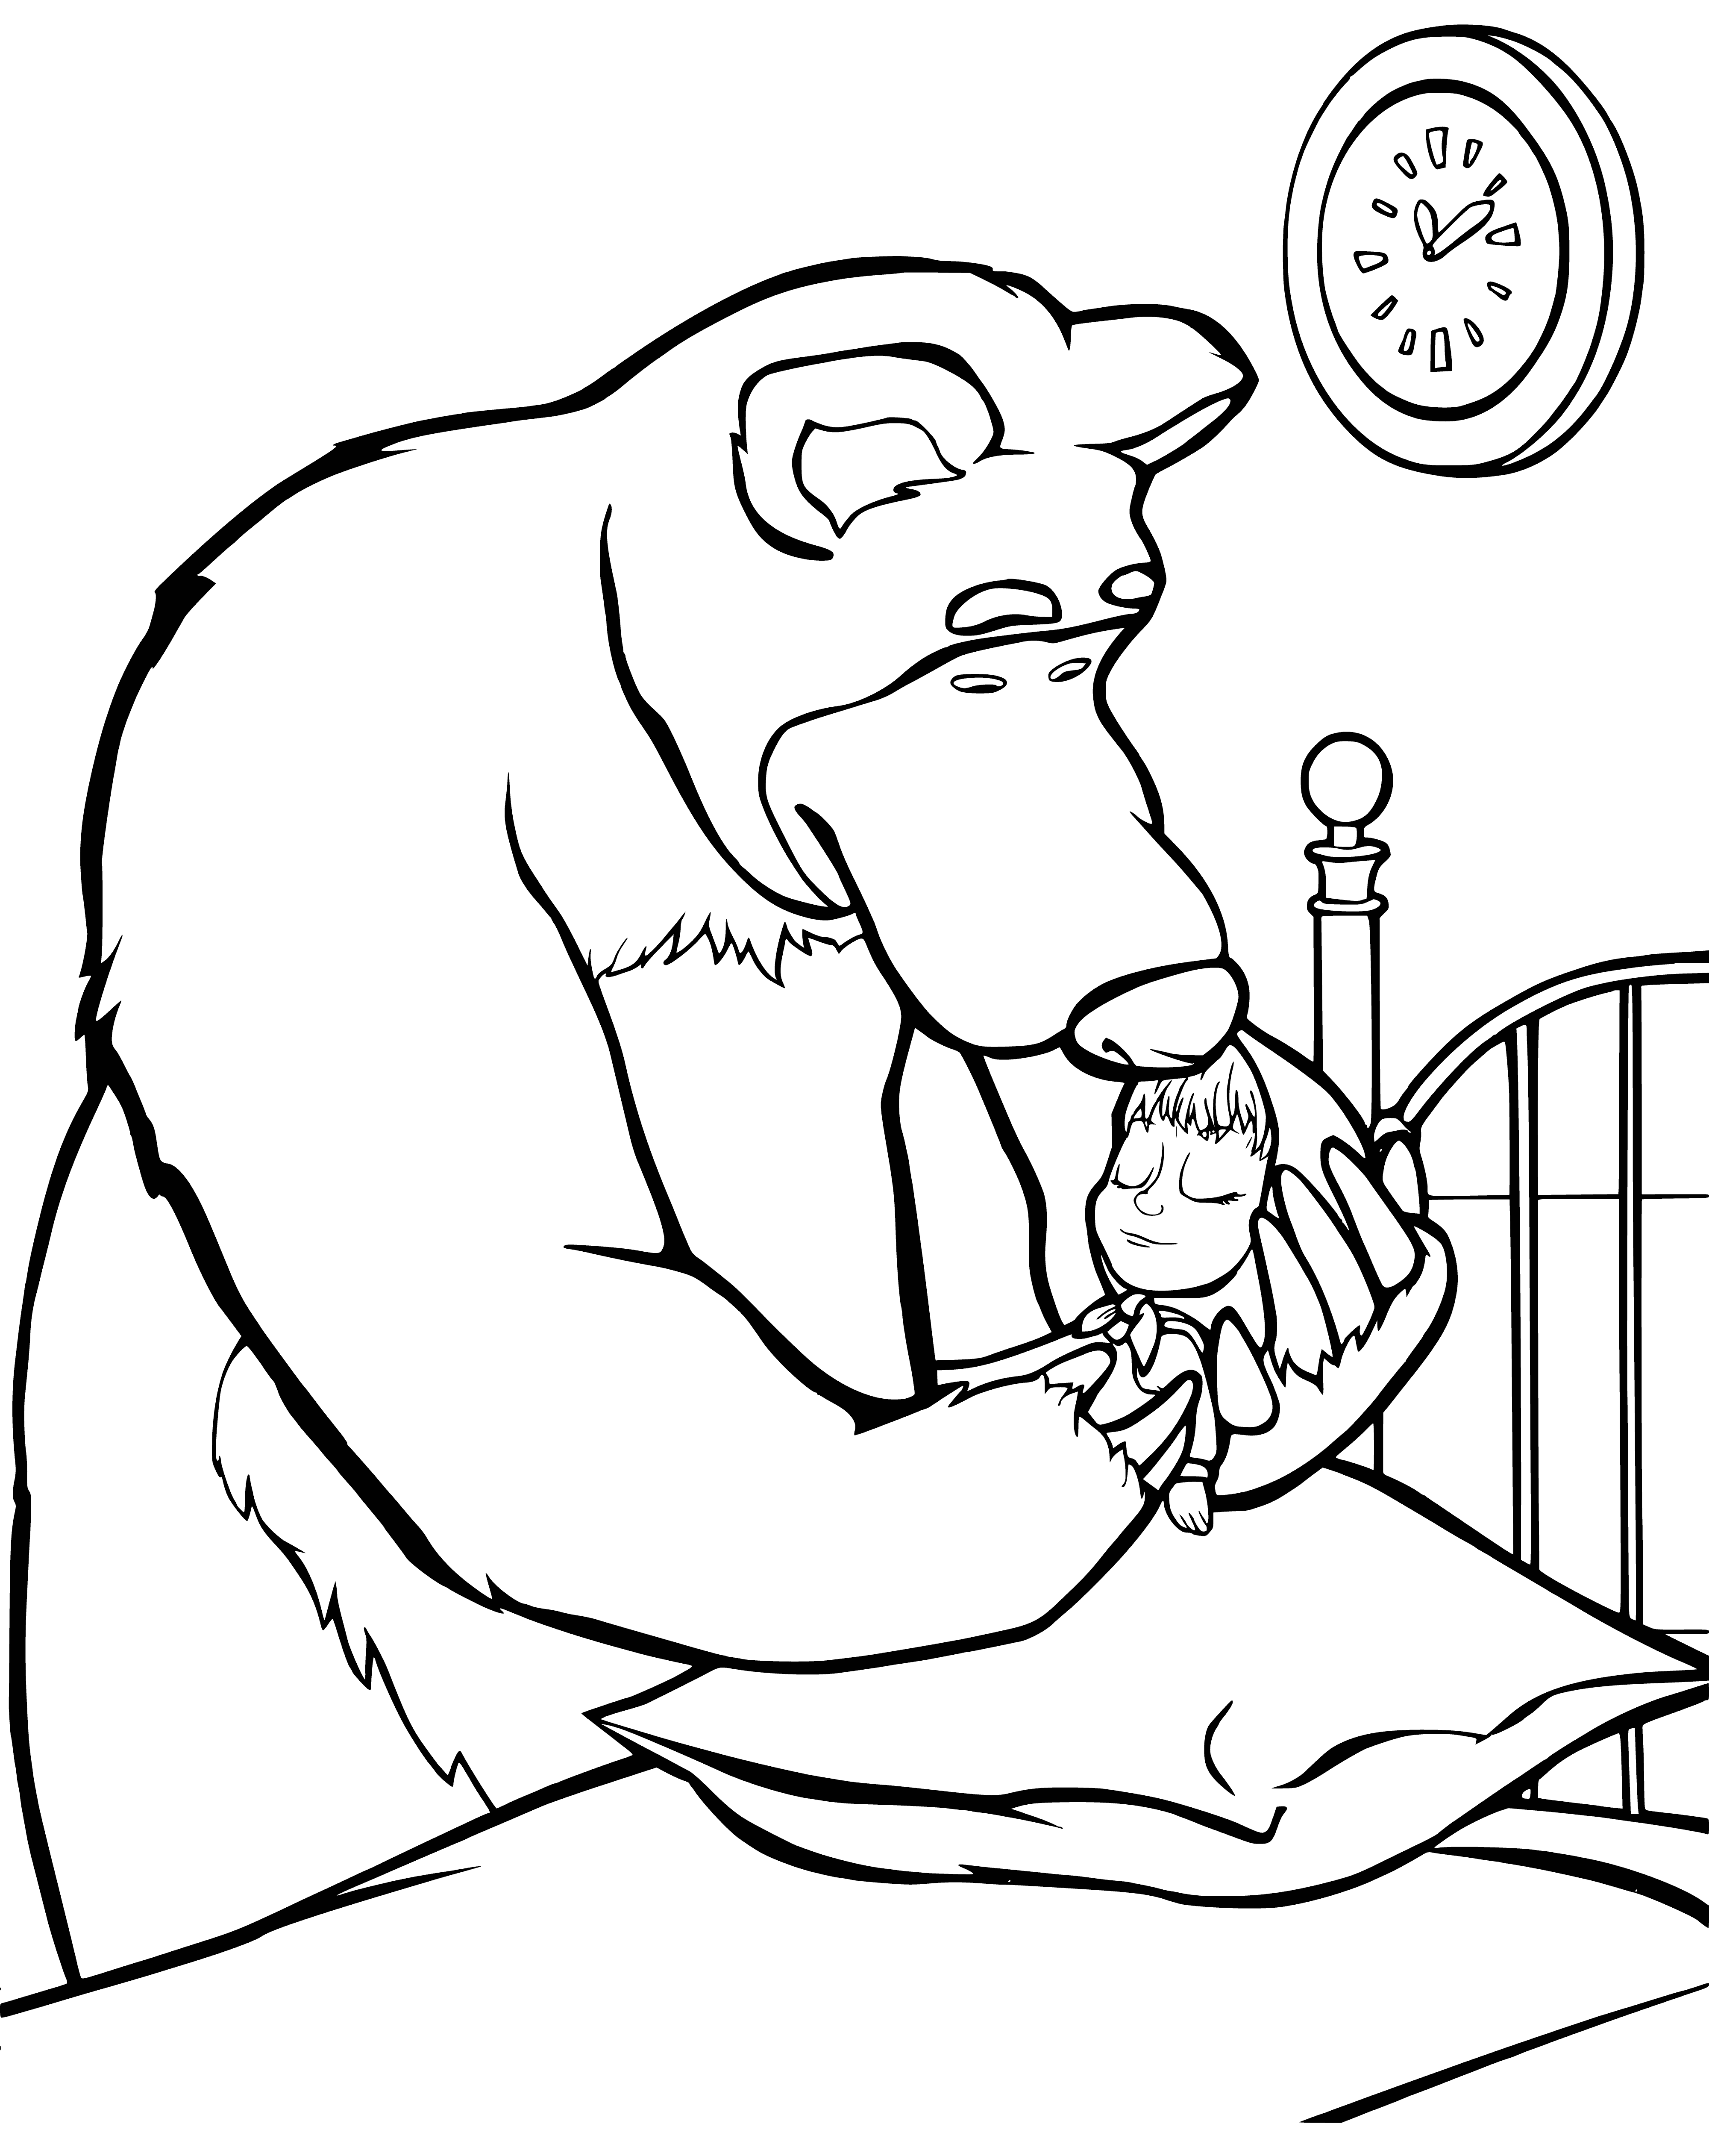 coloring page: She's scared at first, but the bear starts playing with her and they become friends.

Masha & Bear become friends after playing together; she's scared, but he lays her gently on the ground.